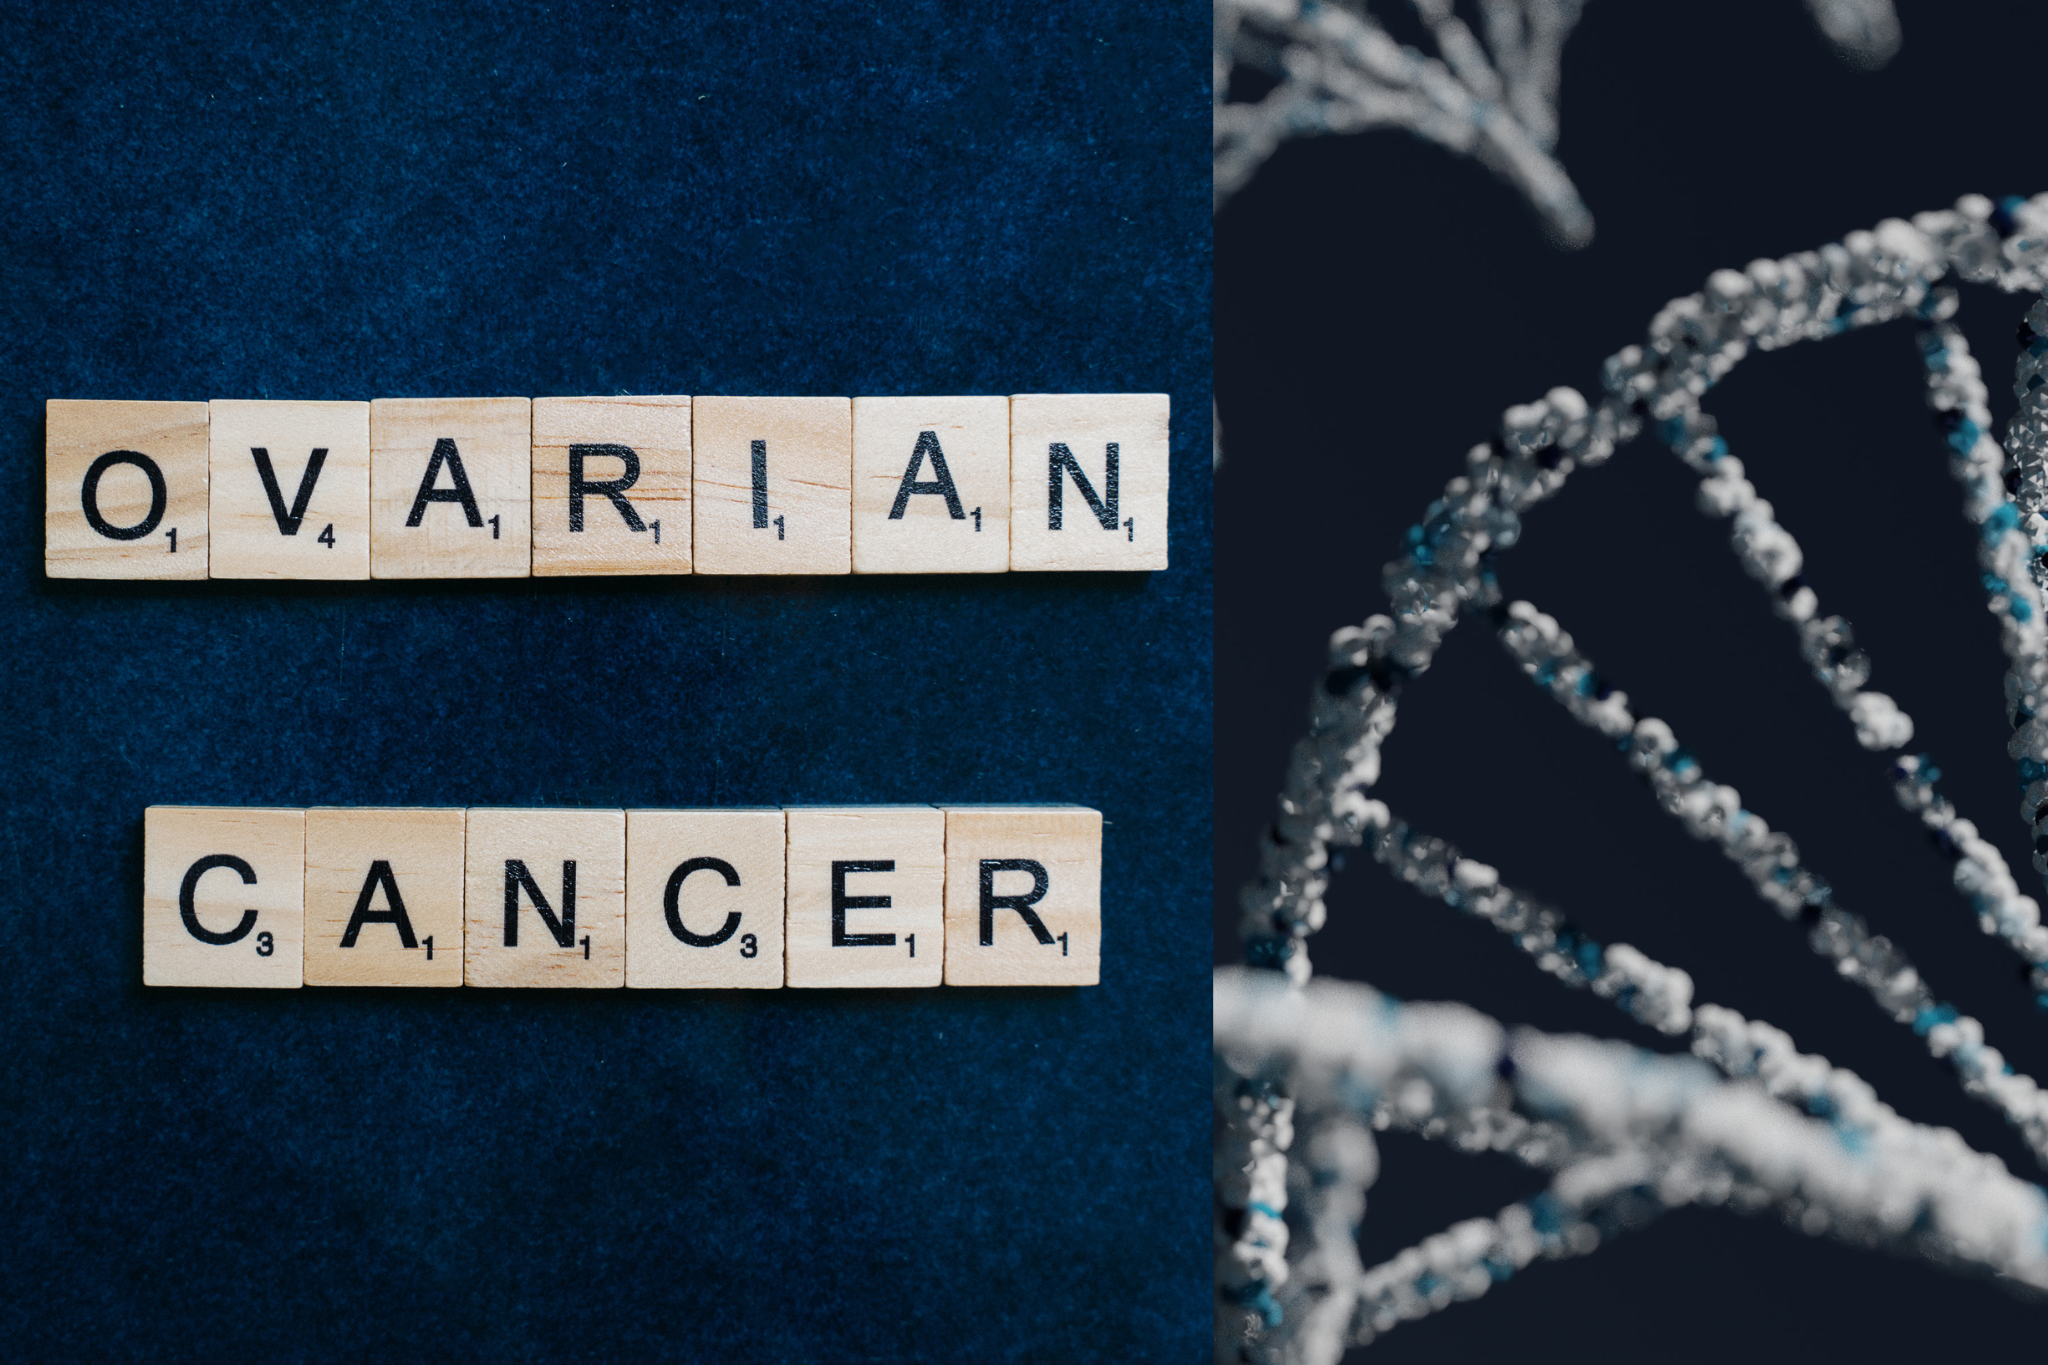 Ovarian cancer and genes